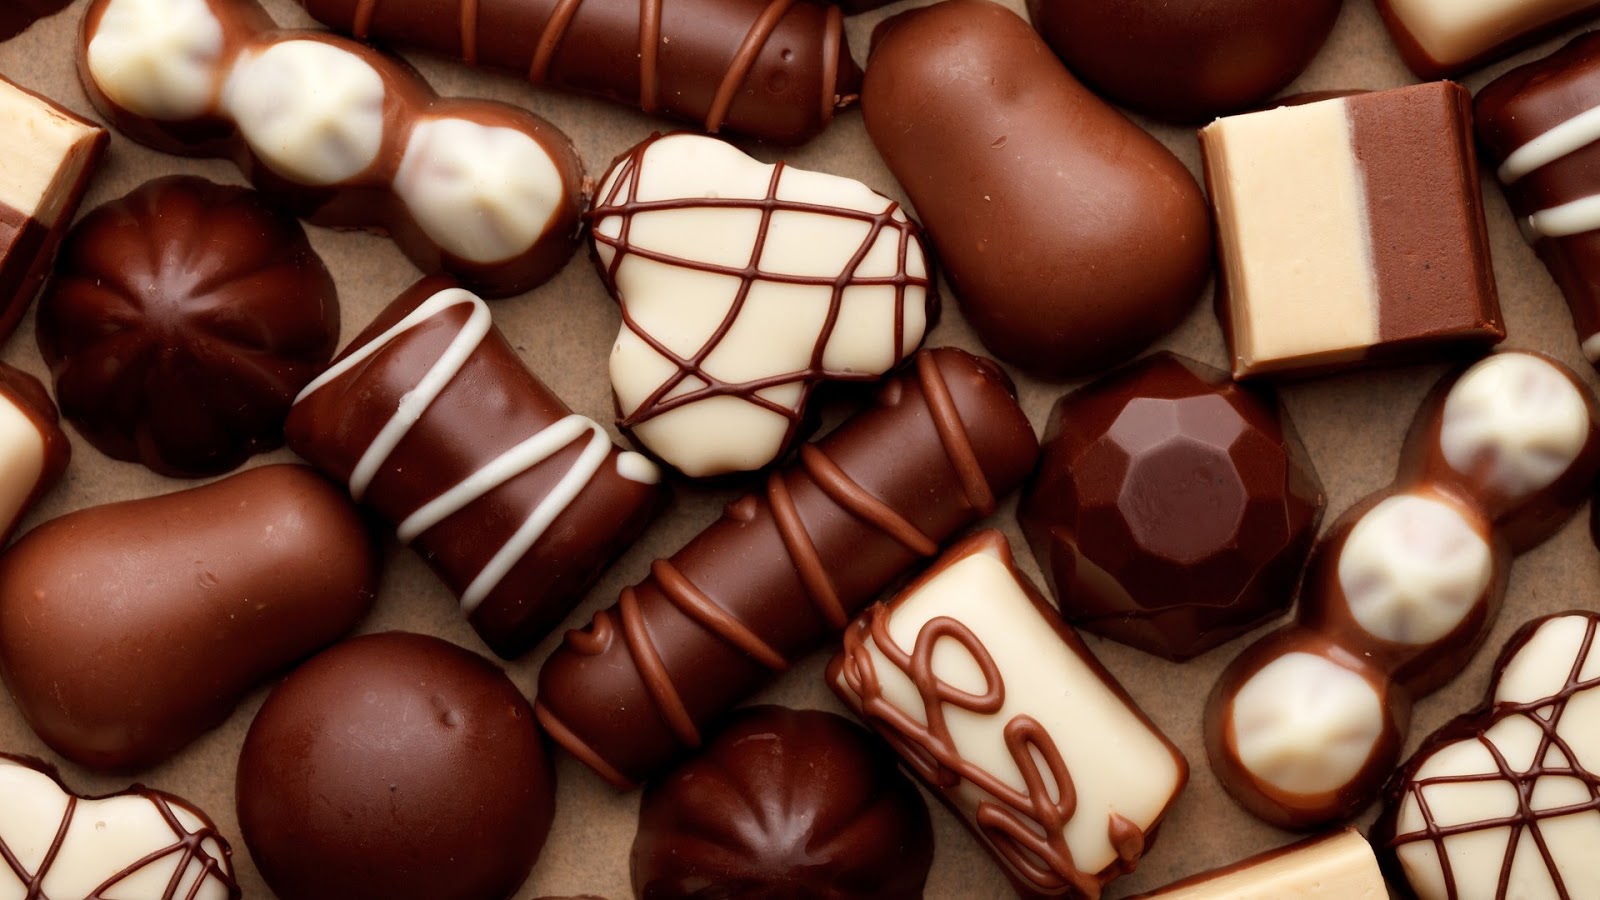 Hope you like all best collection of Chocolate Day HD Wallpaper Free Download | 9 Feb Valentine's Week 3rd Day, Download the amazing bundle of Chocolate Day ...